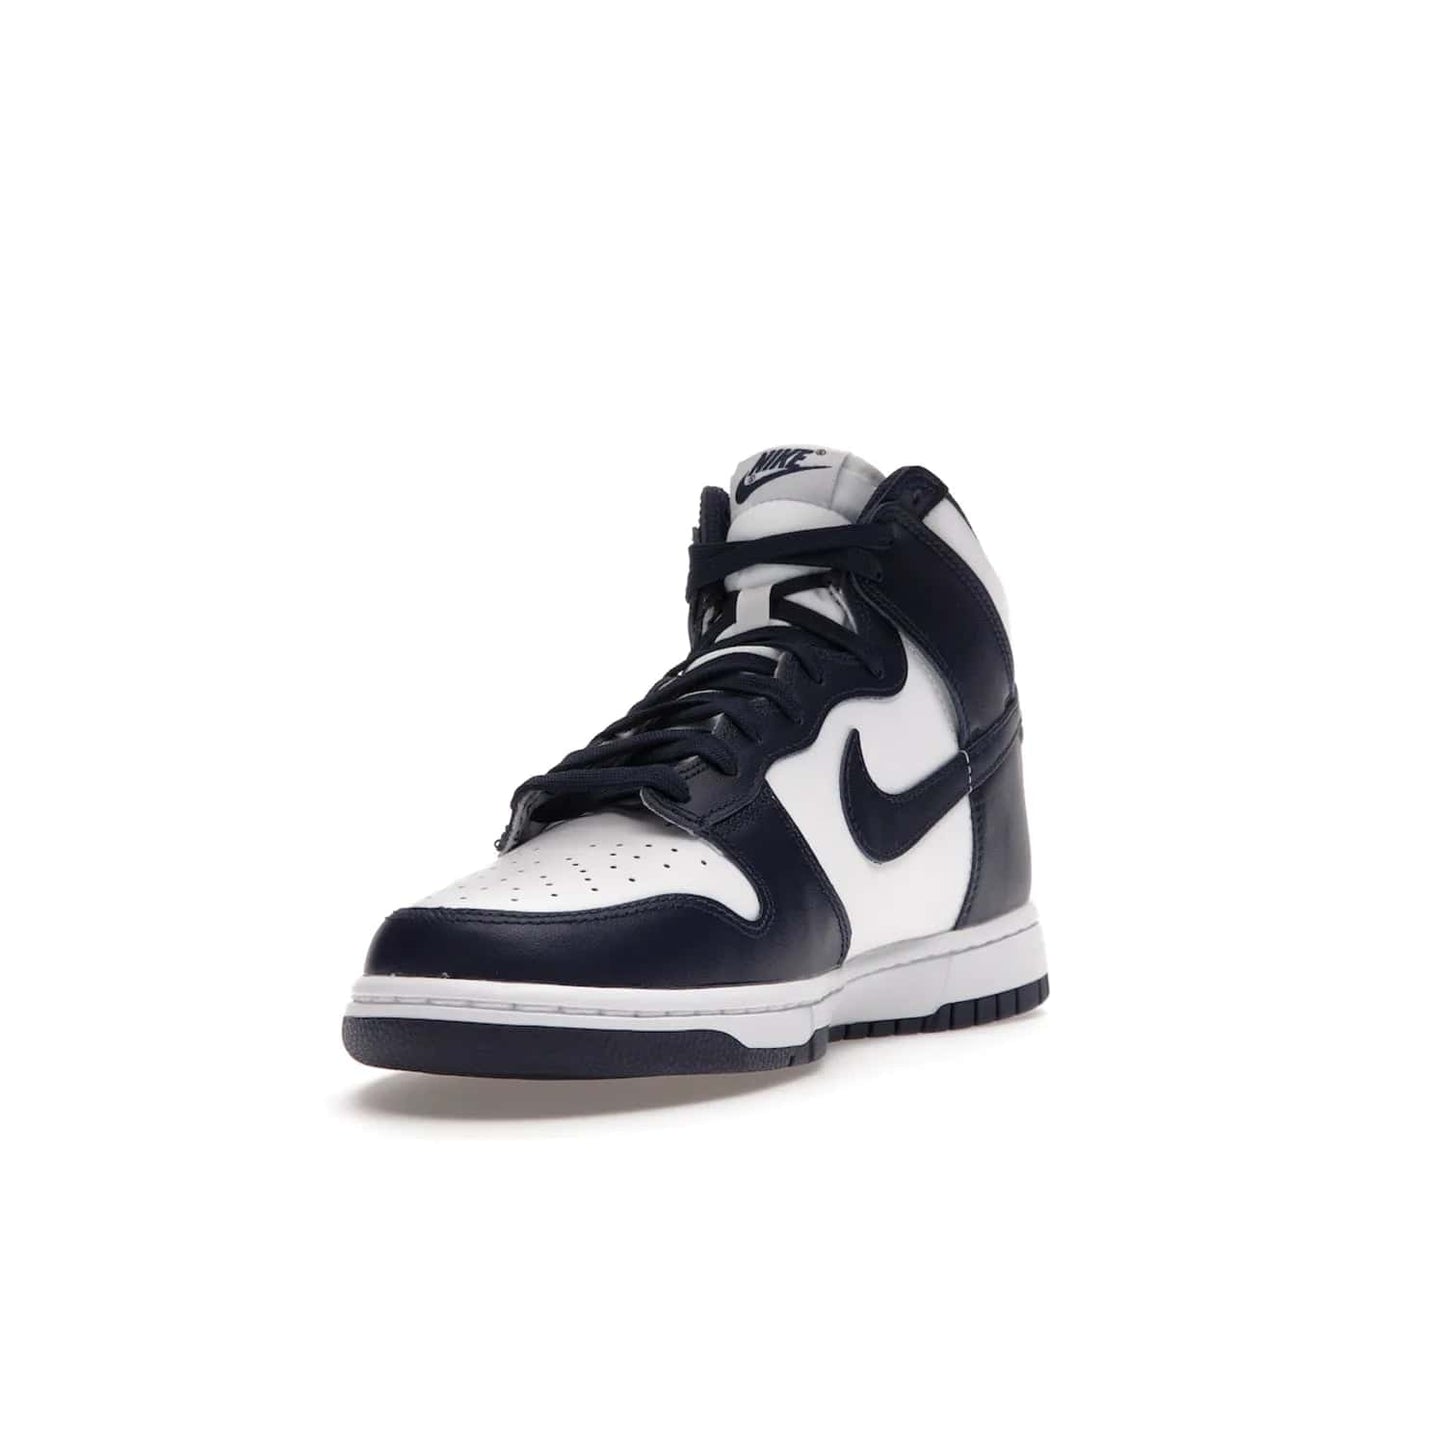 Nike Dunk High Championship Navy - Image 13 - Only at www.BallersClubKickz.com - Classic Nike Dunk High sneaker delivers an unforgettable style with white leather upper, Championship Navy overlays, and matching woven tongue label and sole. Make a statement with the Championship Navy today.